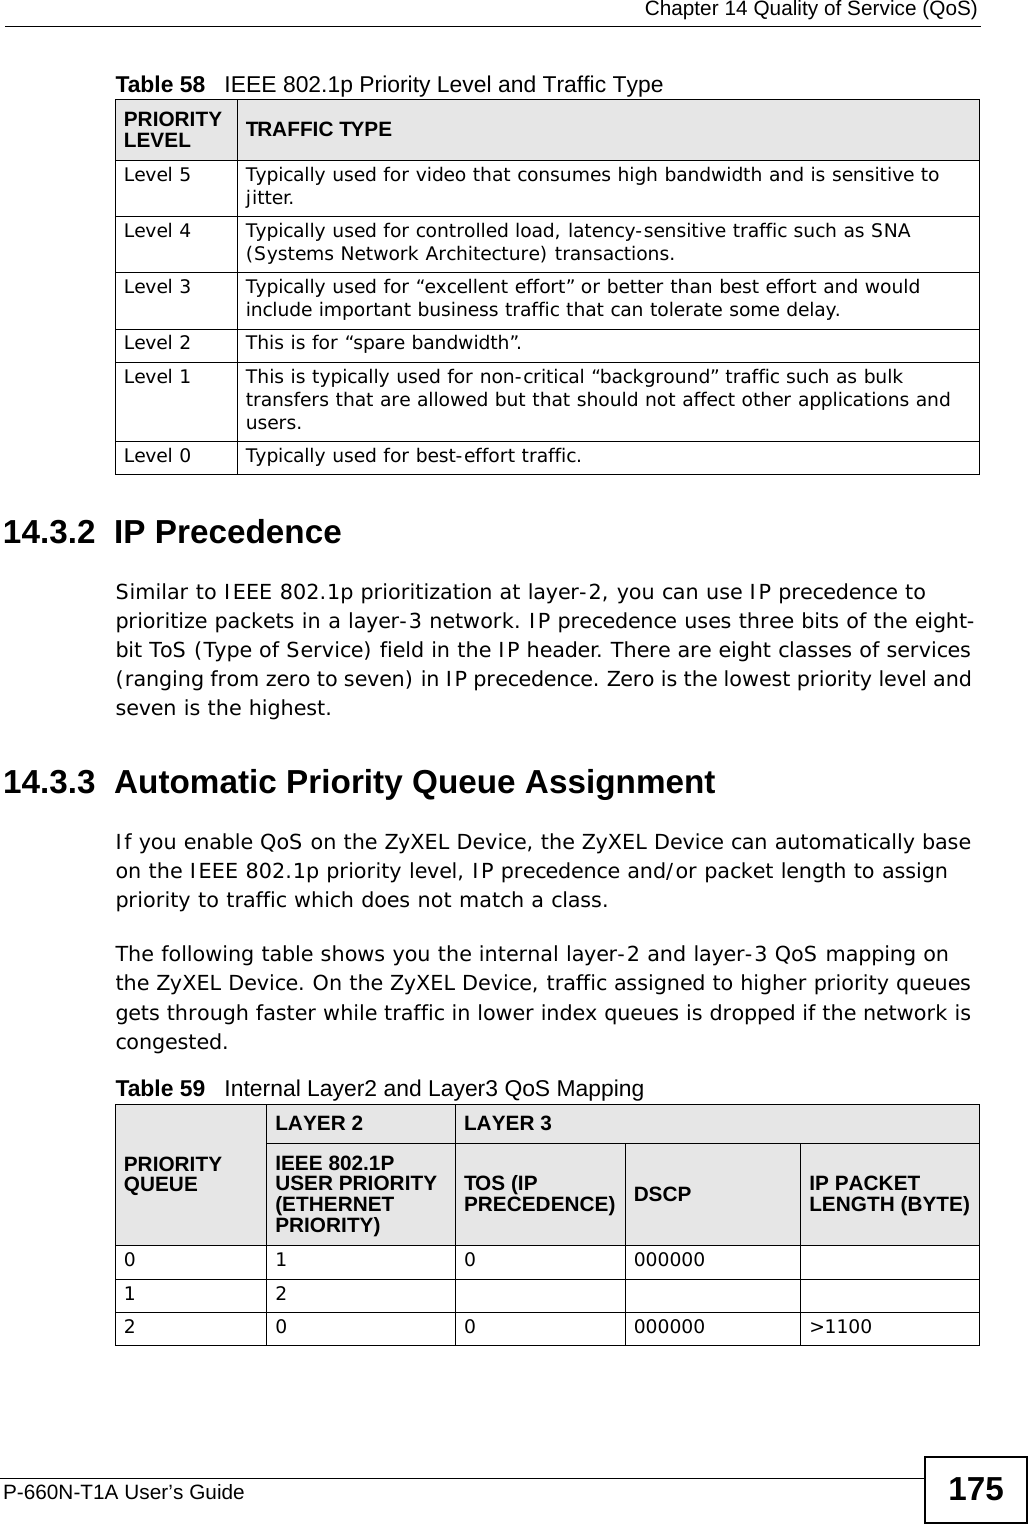  Chapter 14 Quality of Service (QoS)P-660N-T1A User’s Guide 17514.3.2  IP PrecedenceSimilar to IEEE 802.1p prioritization at layer-2, you can use IP precedence to prioritize packets in a layer-3 network. IP precedence uses three bits of the eight-bit ToS (Type of Service) field in the IP header. There are eight classes of services (ranging from zero to seven) in IP precedence. Zero is the lowest priority level and seven is the highest.14.3.3  Automatic Priority Queue AssignmentIf you enable QoS on the ZyXEL Device, the ZyXEL Device can automatically base on the IEEE 802.1p priority level, IP precedence and/or packet length to assign priority to traffic which does not match a class.The following table shows you the internal layer-2 and layer-3 QoS mapping on the ZyXEL Device. On the ZyXEL Device, traffic assigned to higher priority queues gets through faster while traffic in lower index queues is dropped if the network is congested.Level 5 Typically used for video that consumes high bandwidth and is sensitive to jitter.Level 4 Typically used for controlled load, latency-sensitive traffic such as SNA (Systems Network Architecture) transactions.Level 3 Typically used for “excellent effort” or better than best effort and would include important business traffic that can tolerate some delay.Level 2 This is for “spare bandwidth”. Level 1 This is typically used for non-critical “background” traffic such as bulk transfers that are allowed but that should not affect other applications and users. Level 0 Typically used for best-effort traffic.Table 58   IEEE 802.1p Priority Level and Traffic TypePRIORITY LEVEL TRAFFIC TYPETable 59   Internal Layer2 and Layer3 QoS MappingPRIORITY QUEUELAYER 2 LAYER 3IEEE 802.1P USER PRIORITY (ETHERNET PRIORITY)TOS (IP PRECEDENCE) DSCP IP PACKET LENGTH (BYTE)0 1 0 000000122 0 0 000000 &gt;1100